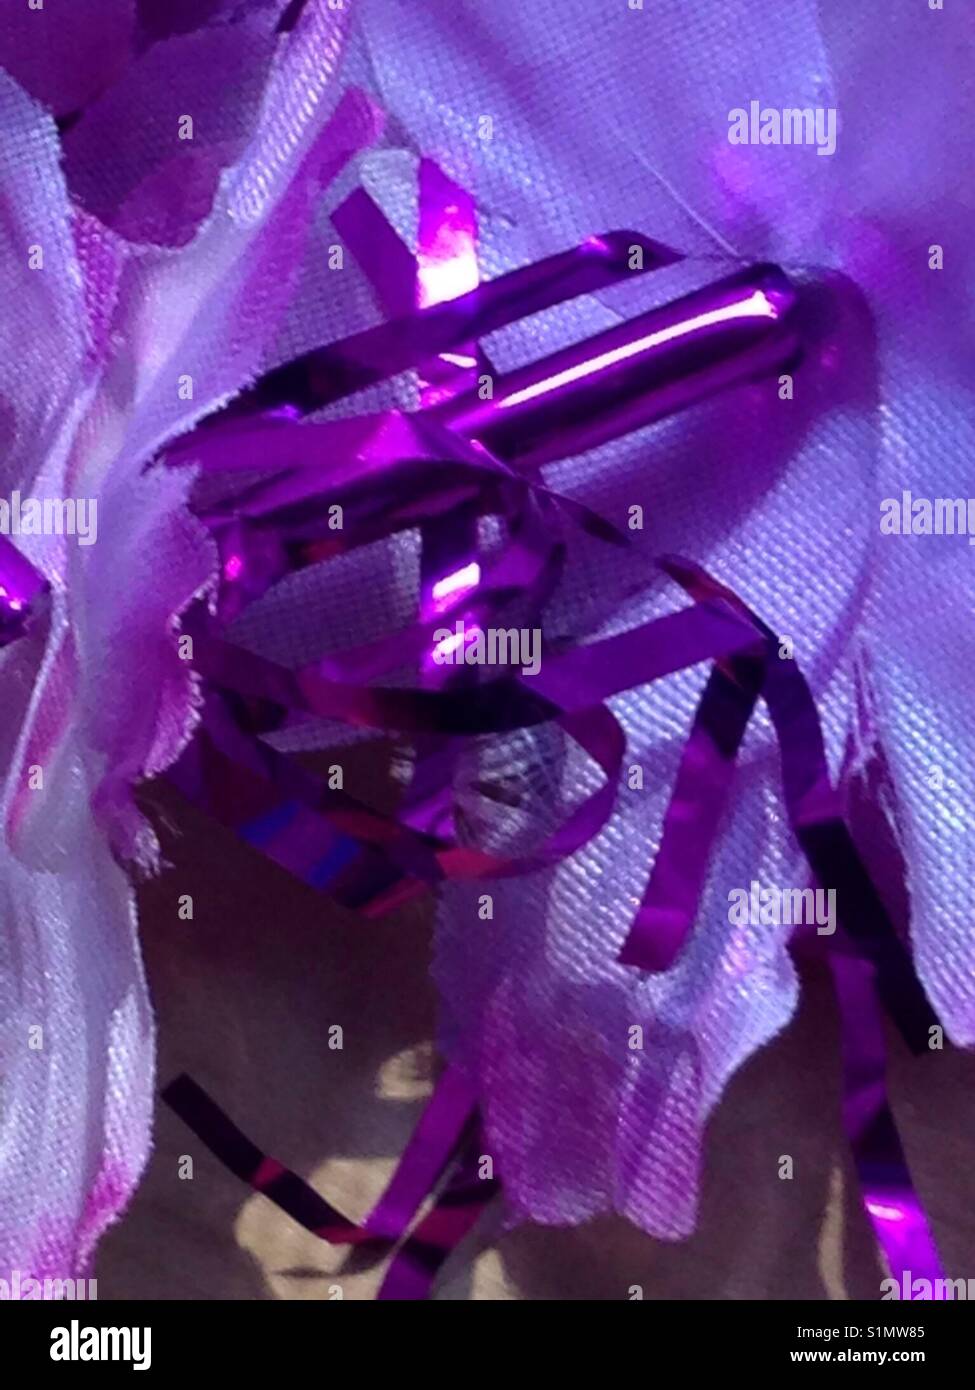 Purple gift wrappings - close up Stock Photo